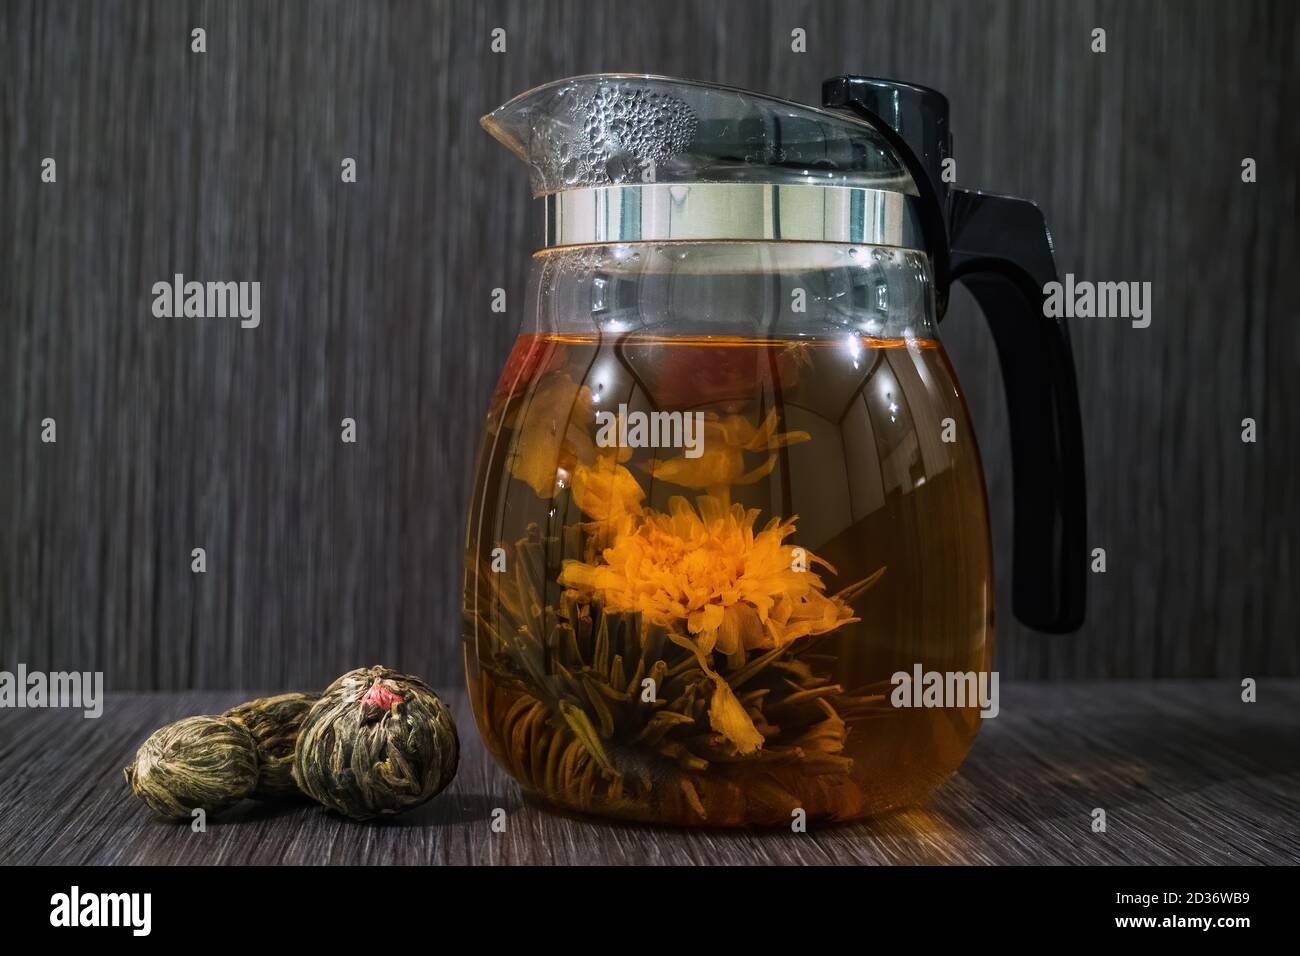 Blooming tea flower in glass teapot and dry flowering tea balls on brown wooden background Stock Photo